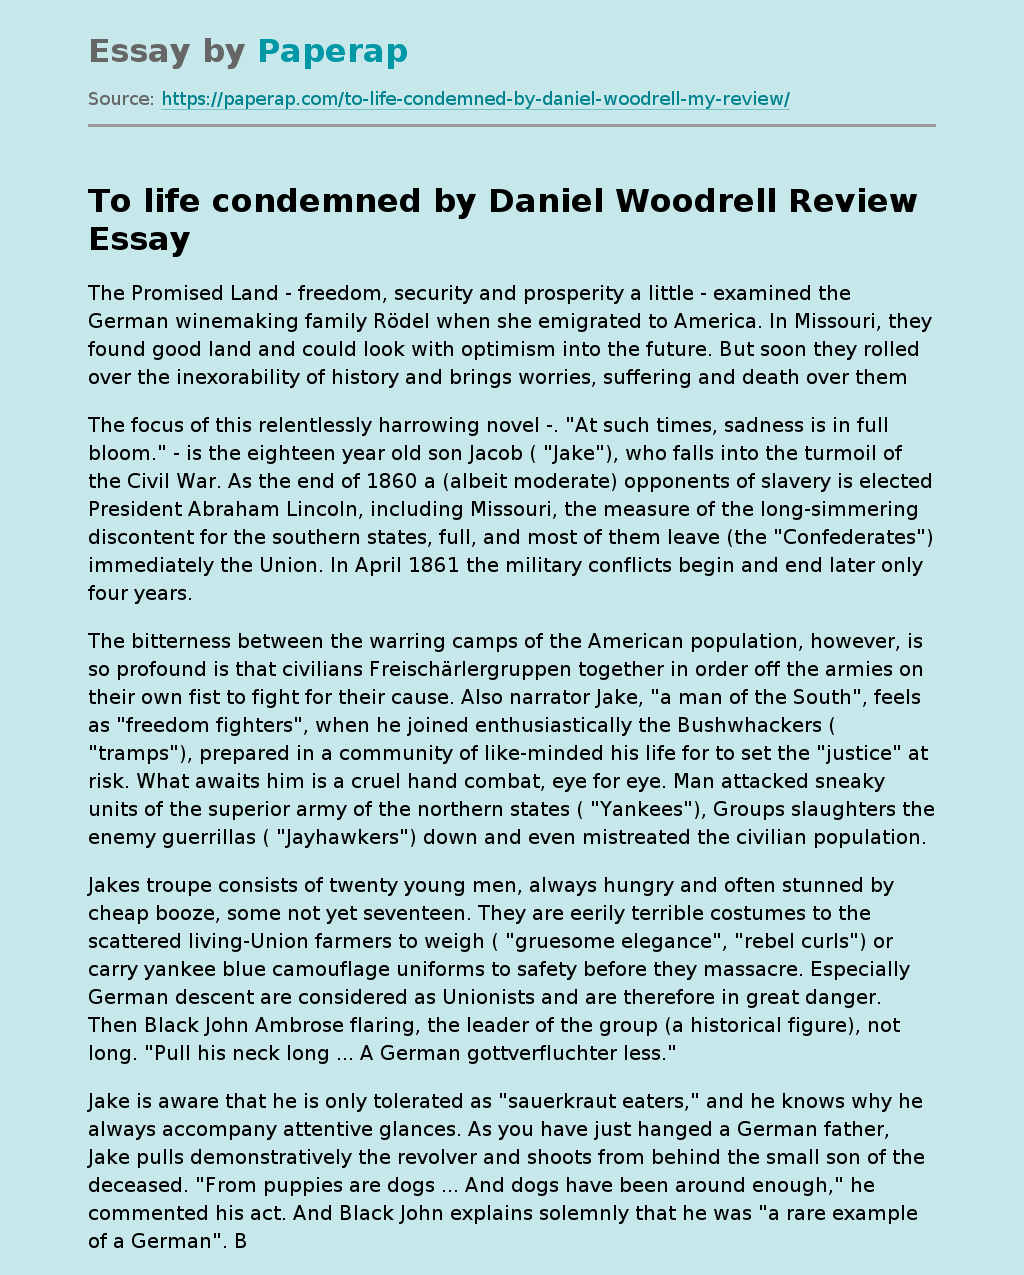 To life condemned by Daniel Woodrell Review